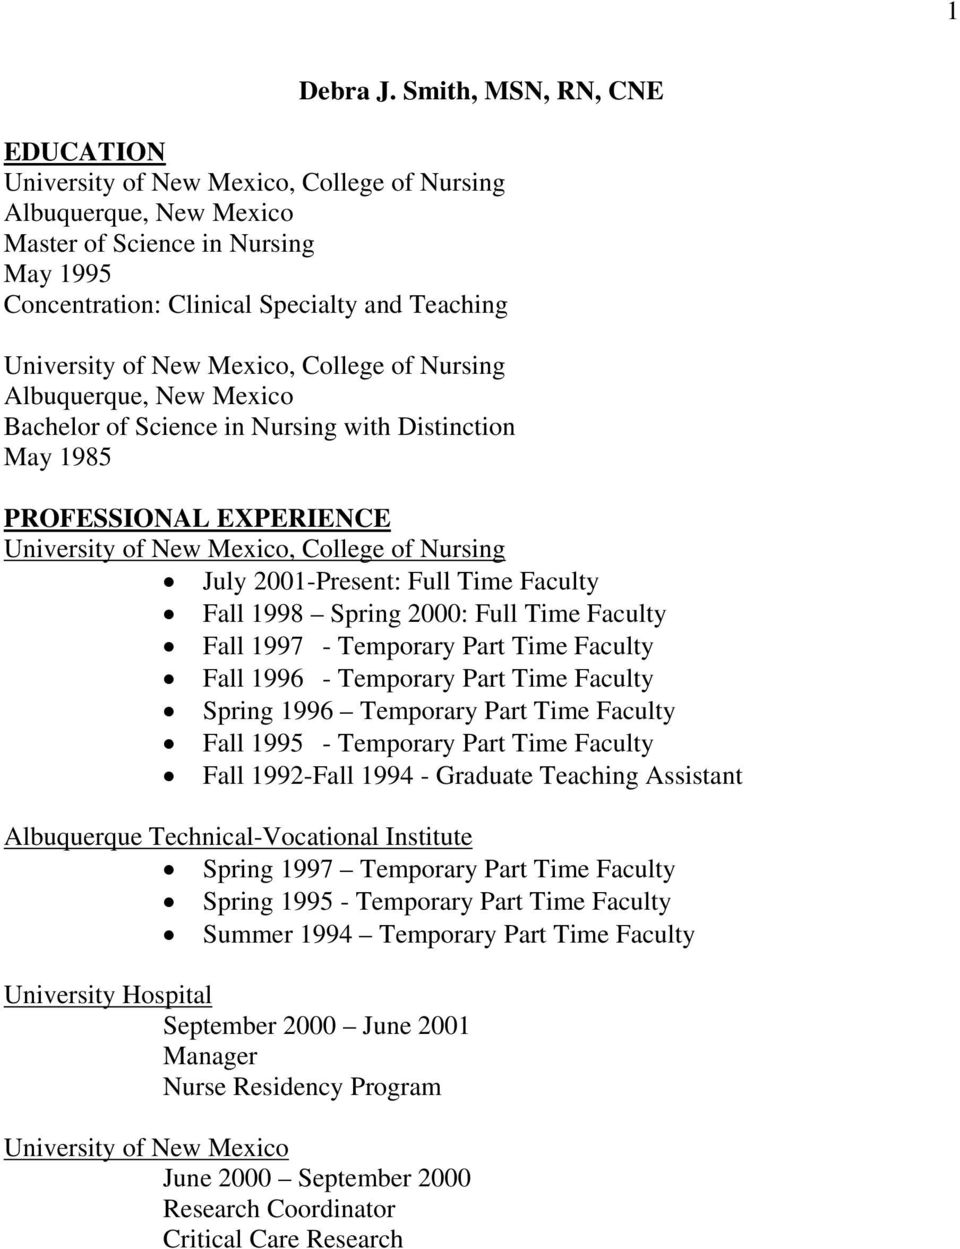 New Mexico, College of Nursing Albuquerque, New Mexico Bachelor of Science in Nursing with Distinction May 1985 PROFESSIONAL EXPERIENCE University of New Mexico, College of Nursing July 2001-Present: